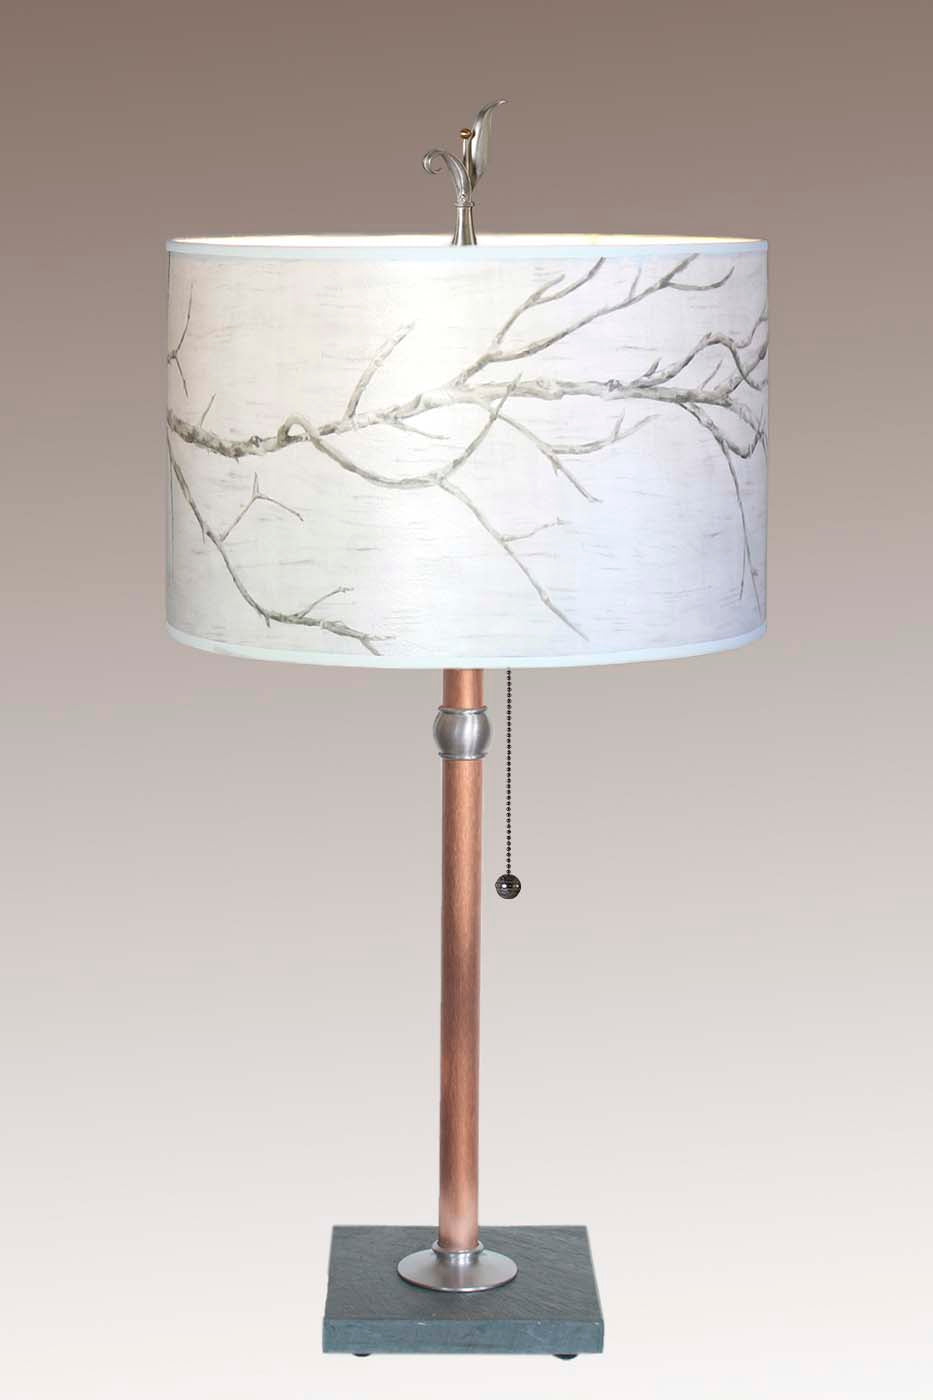 Janna Ugone &amp; Co Table Lamp Copper Table Lamp with Large Drum Shade in Sweeping Branch